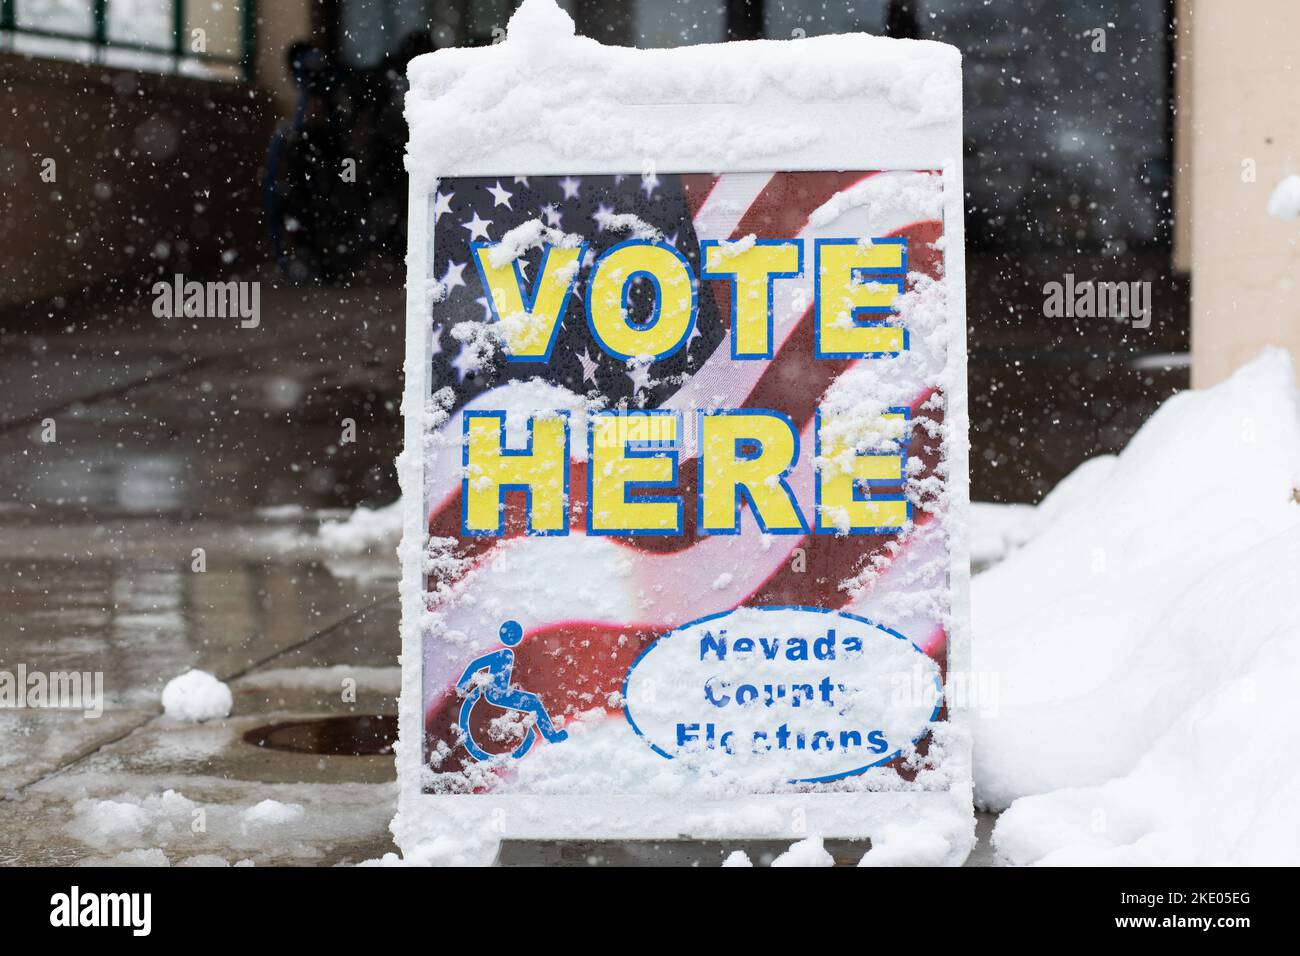 Snowfall and heavy storms impact much of the Western United States during the Midterm Elections. Voting signs posted in front of the Town Hall in central Truckee part of Nevada County, California. November 8, 2022 (Photo by Hale Irwin/Sipa USA) Stock Photo